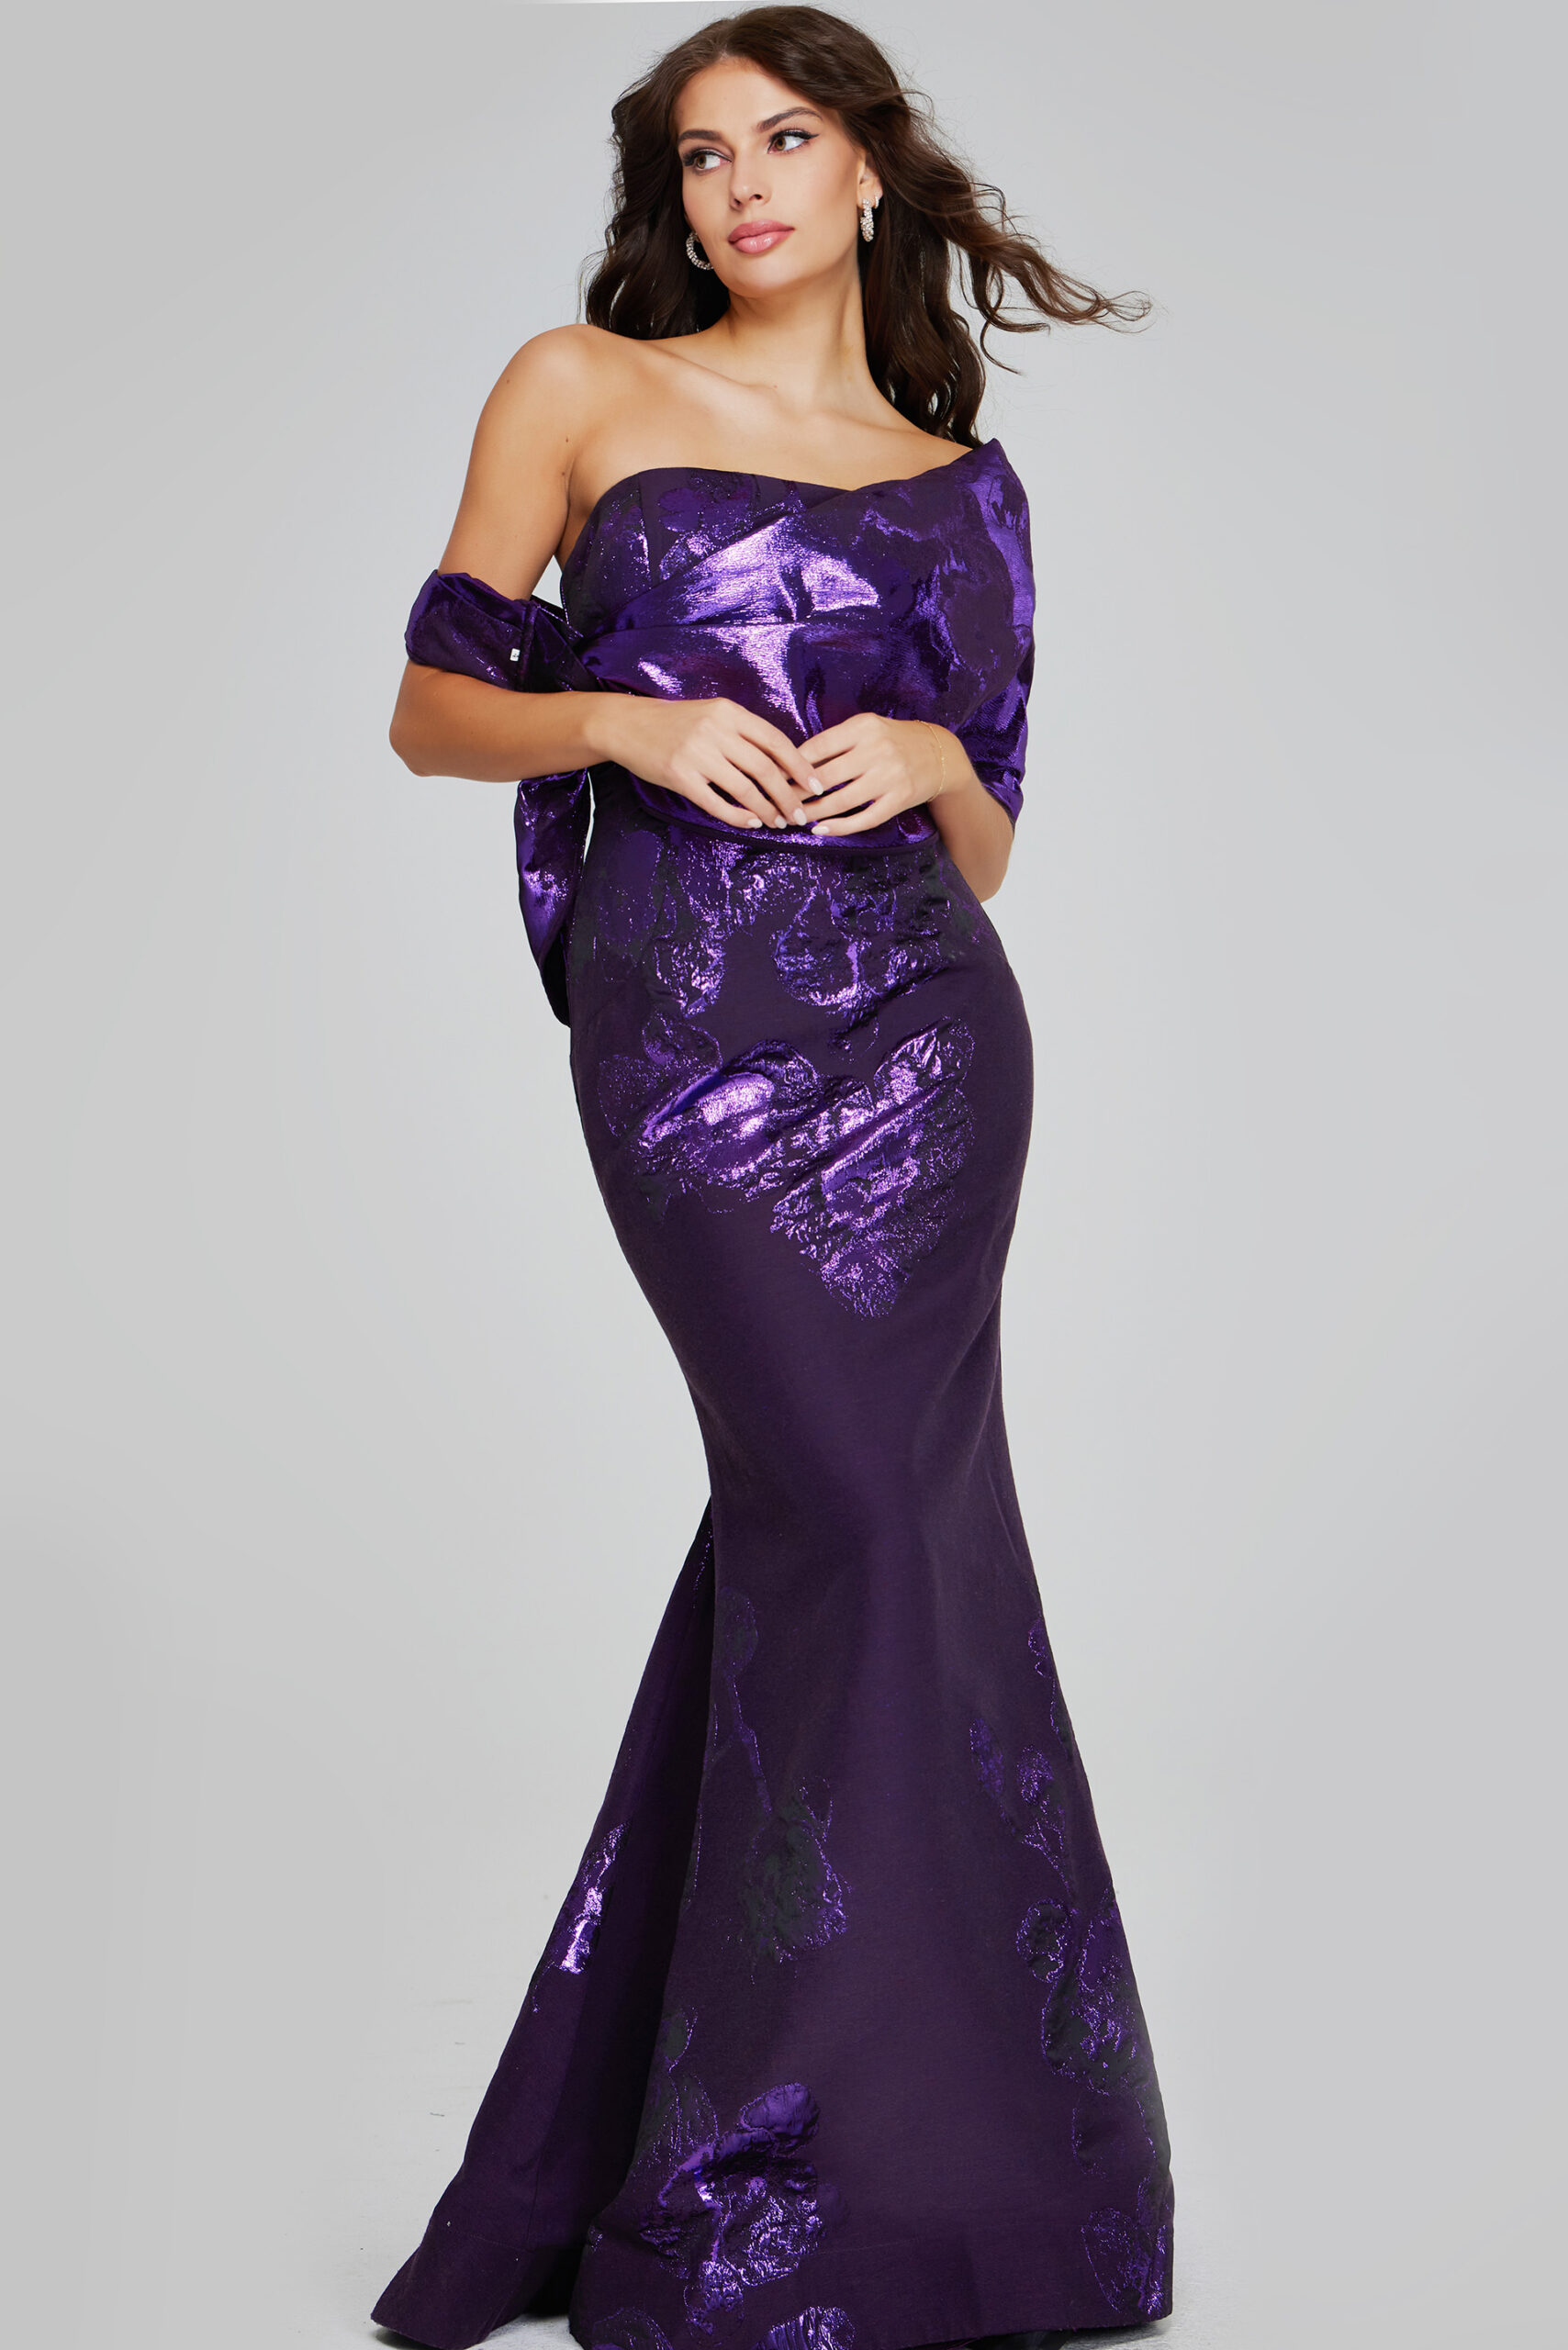 Elegant Purple Strapless Gown with Shimmering Floral Pattern 40318